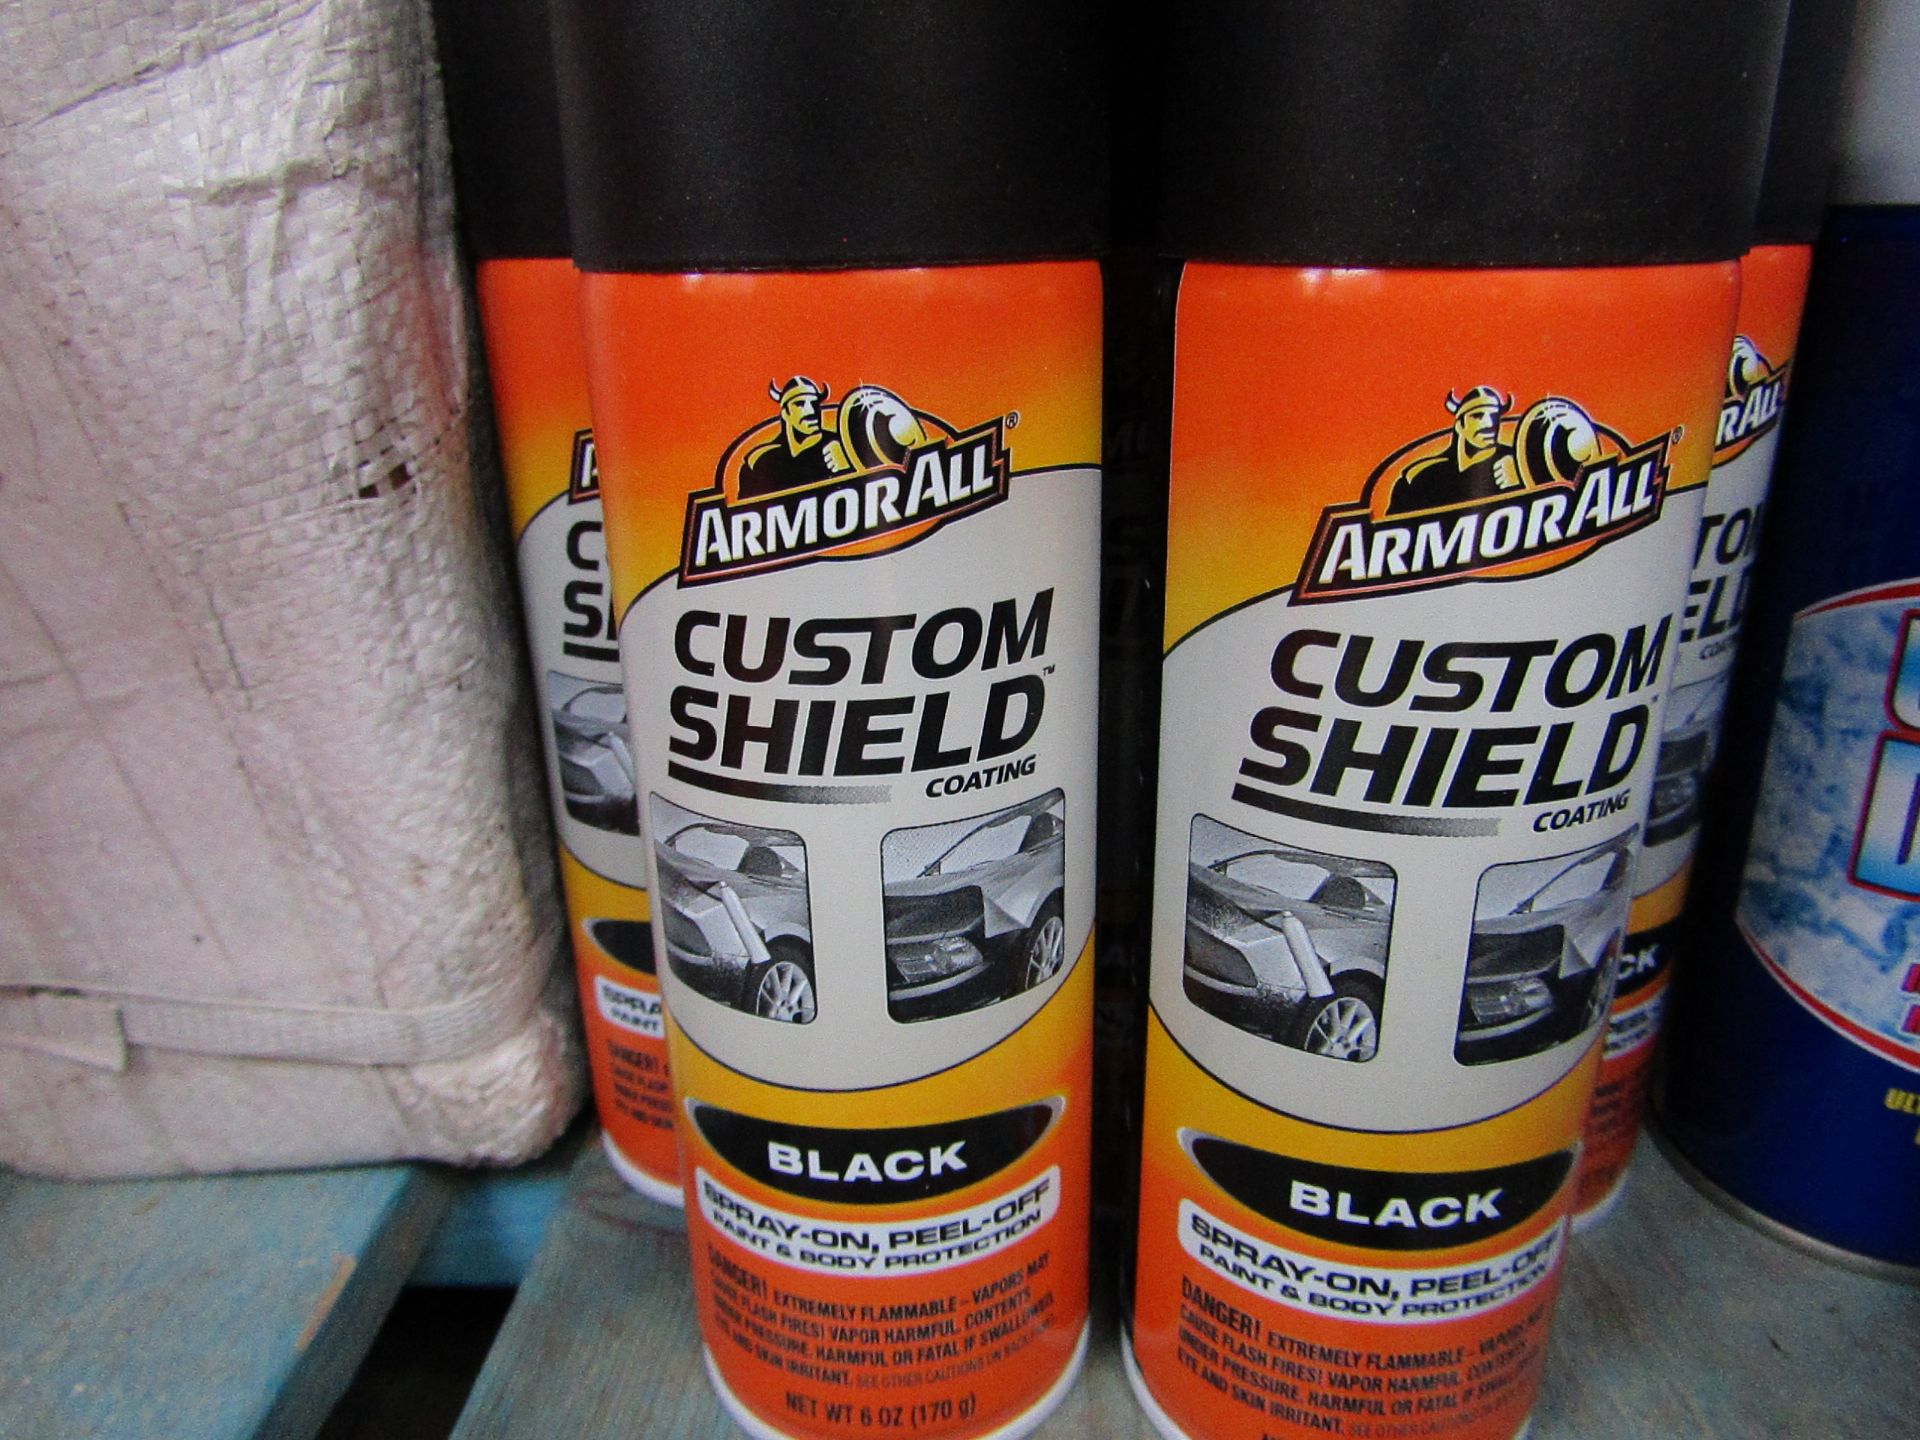 Box of 6 ArmorAll - Custom Shield Paint & Body Protection (Black) - All New & Boxed.